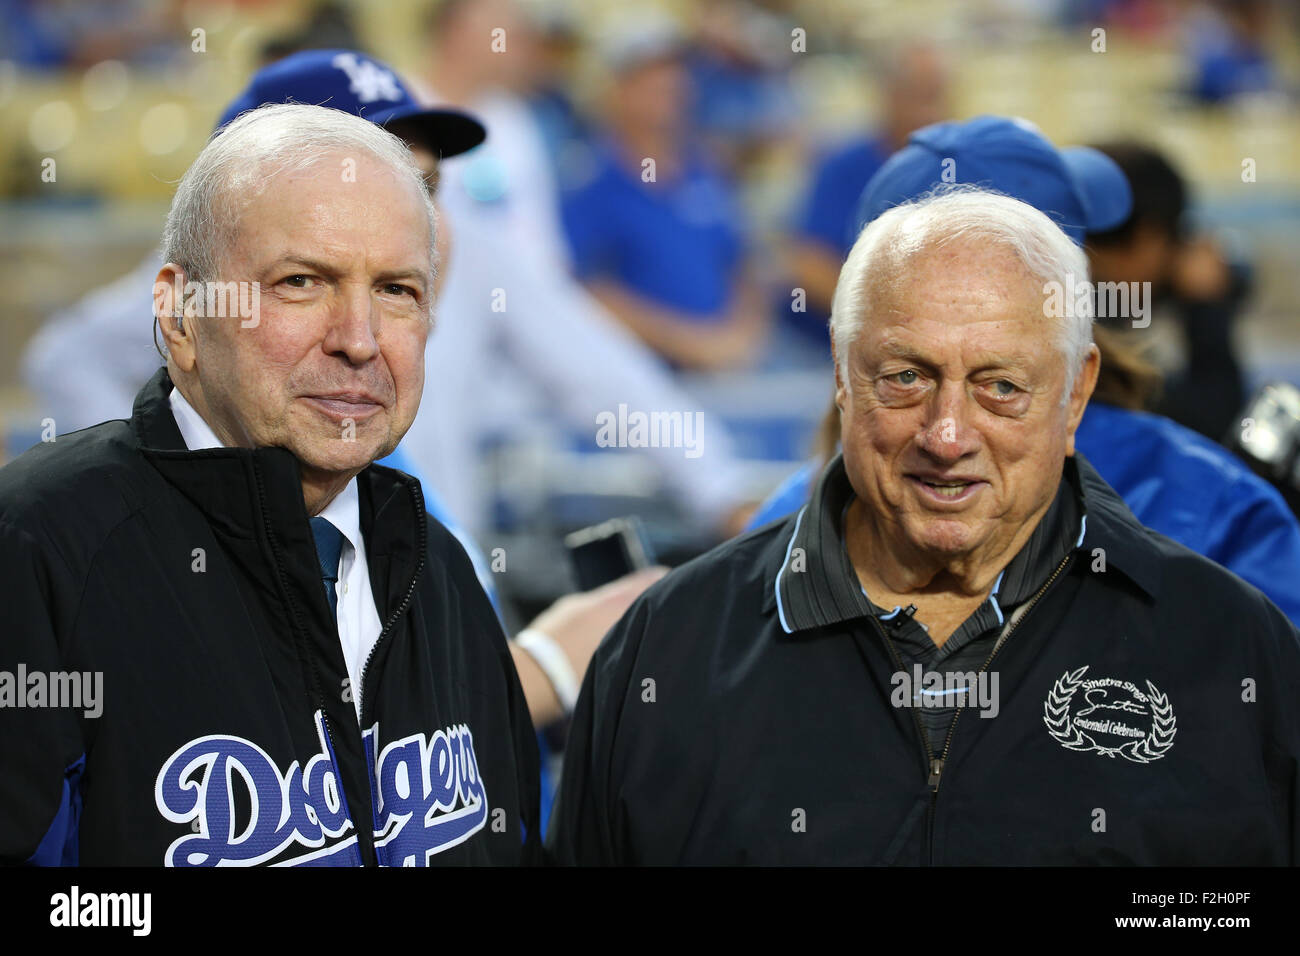 Los Angeles, CA, USA. 18th Sep, 2015. Frank Sinatra Jr. and Tommy Lasorda chat before Frank Sinatra Night at Dodger Stadium in the game between the Pittsburg Pirates and the Los Angeles Dodgers, Dodger Stadium in Los Angeles, CA. Photographer: Peter Joneleit for Cal Sport Media/Alamy Live News Stock Photo